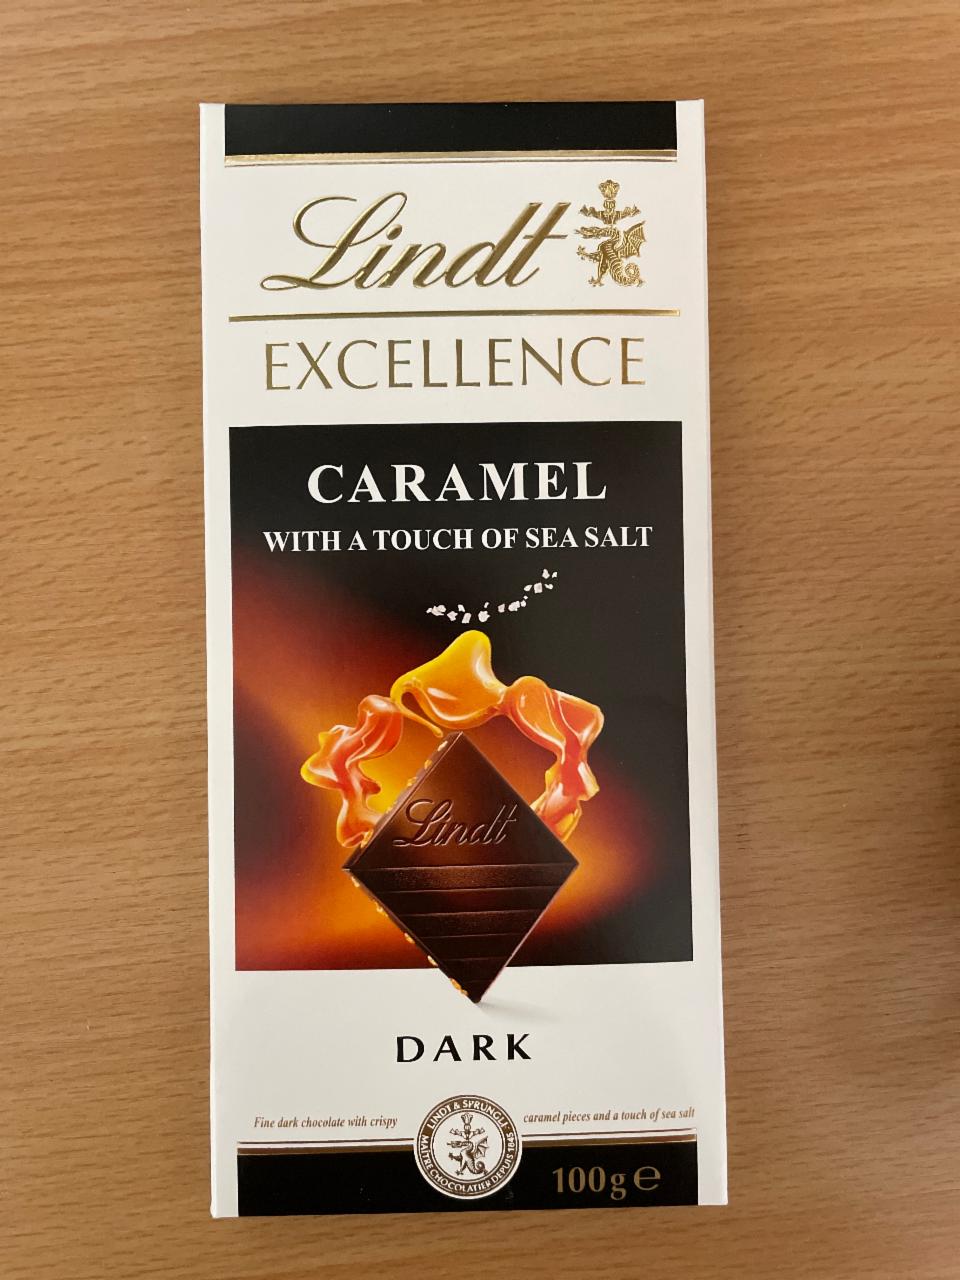 Fotografie - Excellence Caramel with a touch of sea salt Lindt